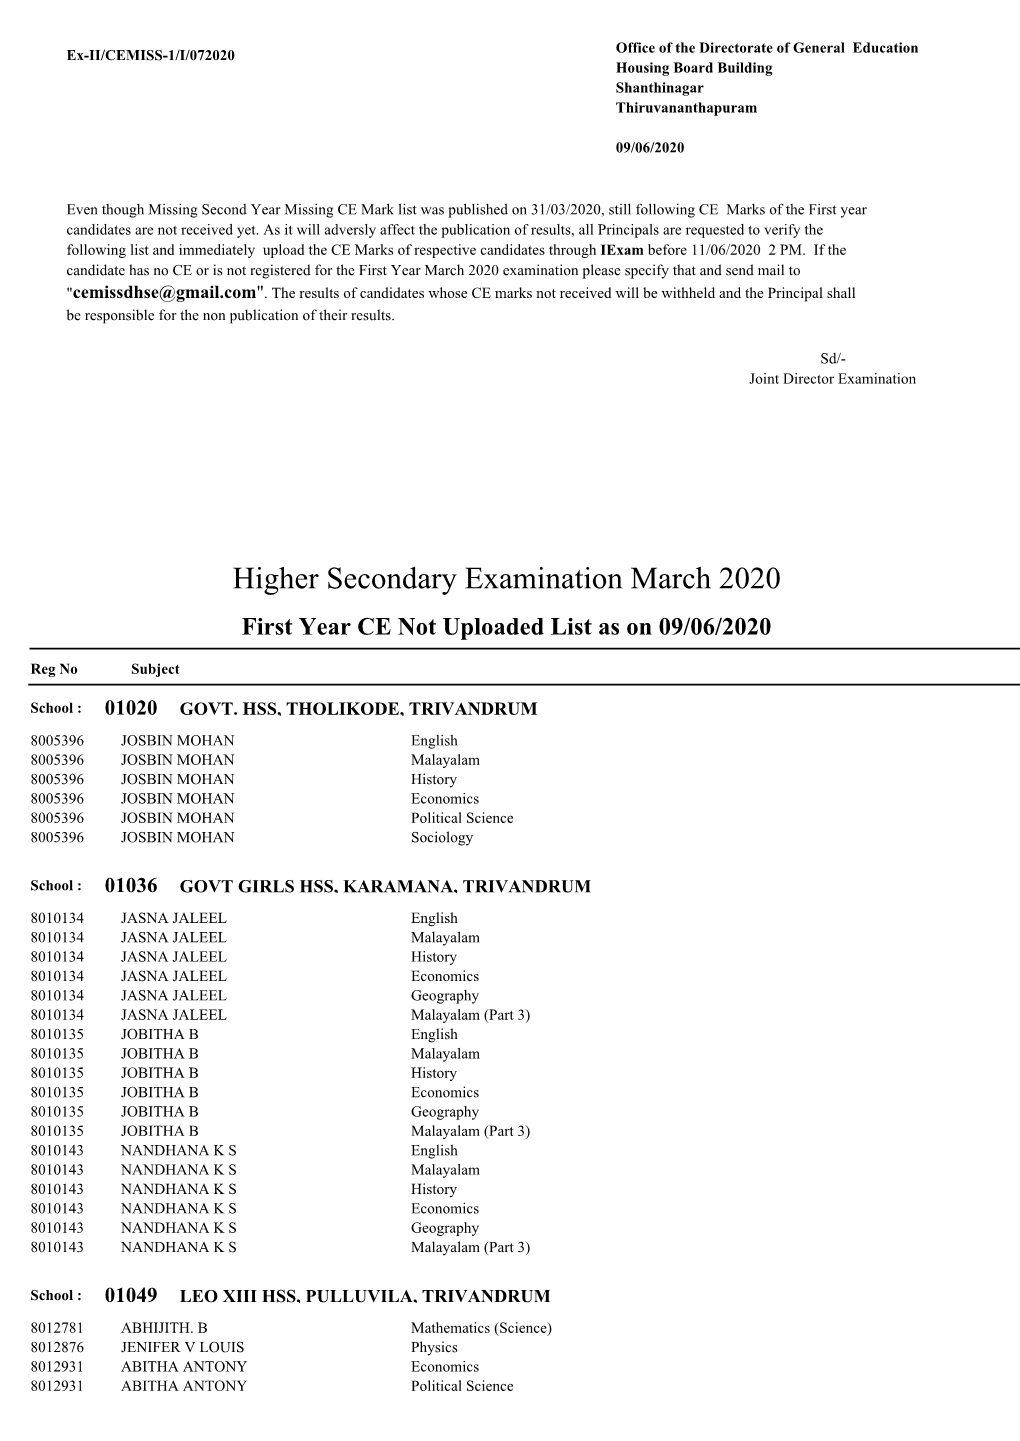 Higher Secondary Examination March 2020 First Year CE Not Uploaded List As on 09/06/2020